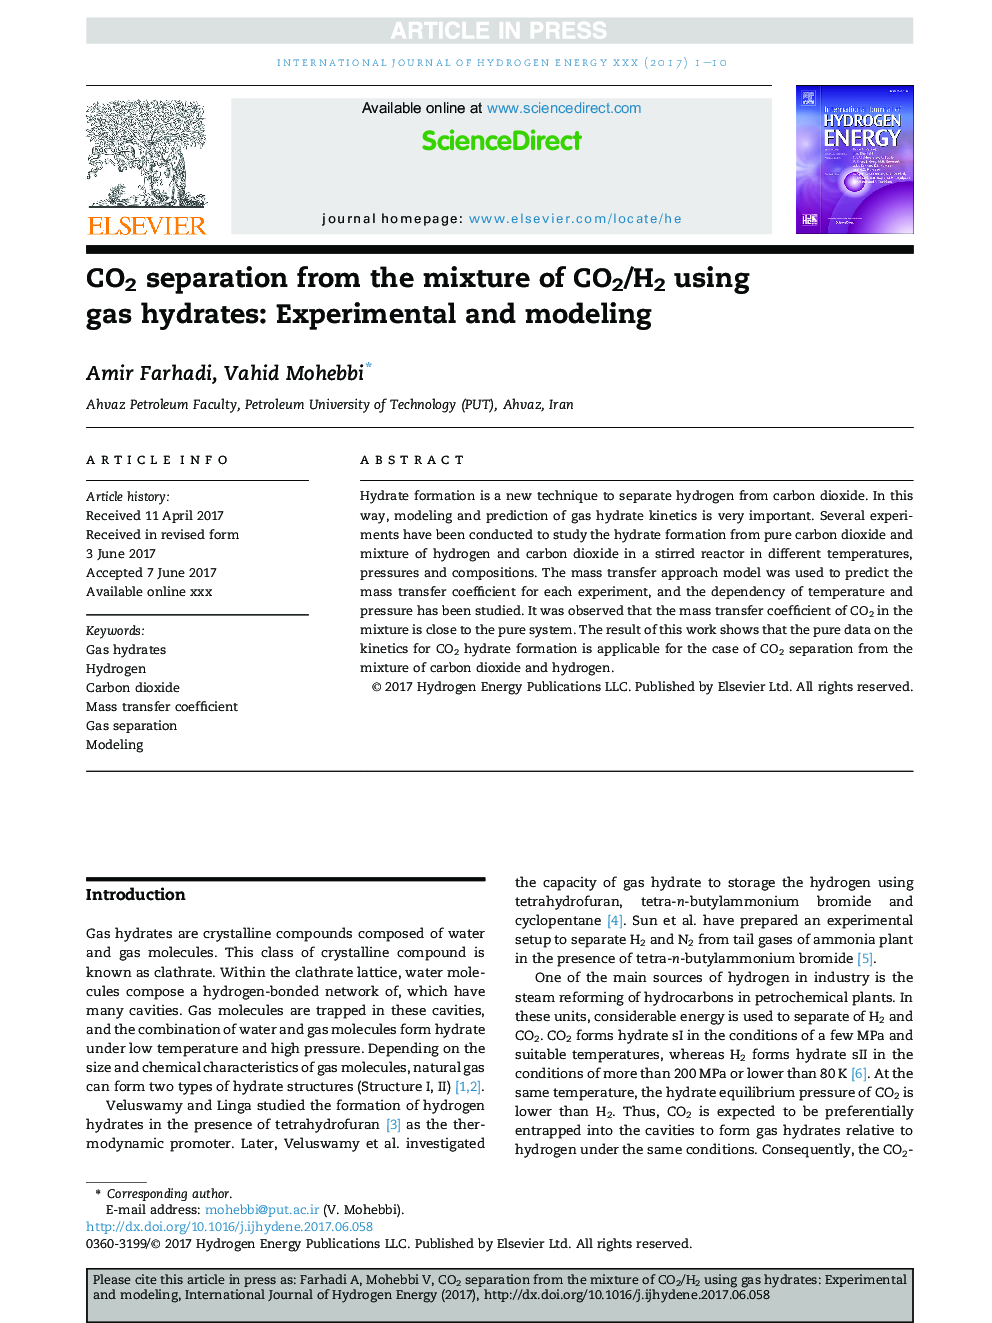 CO2 separation from the mixture of CO2/H2 using gas hydrates: Experimental and modeling